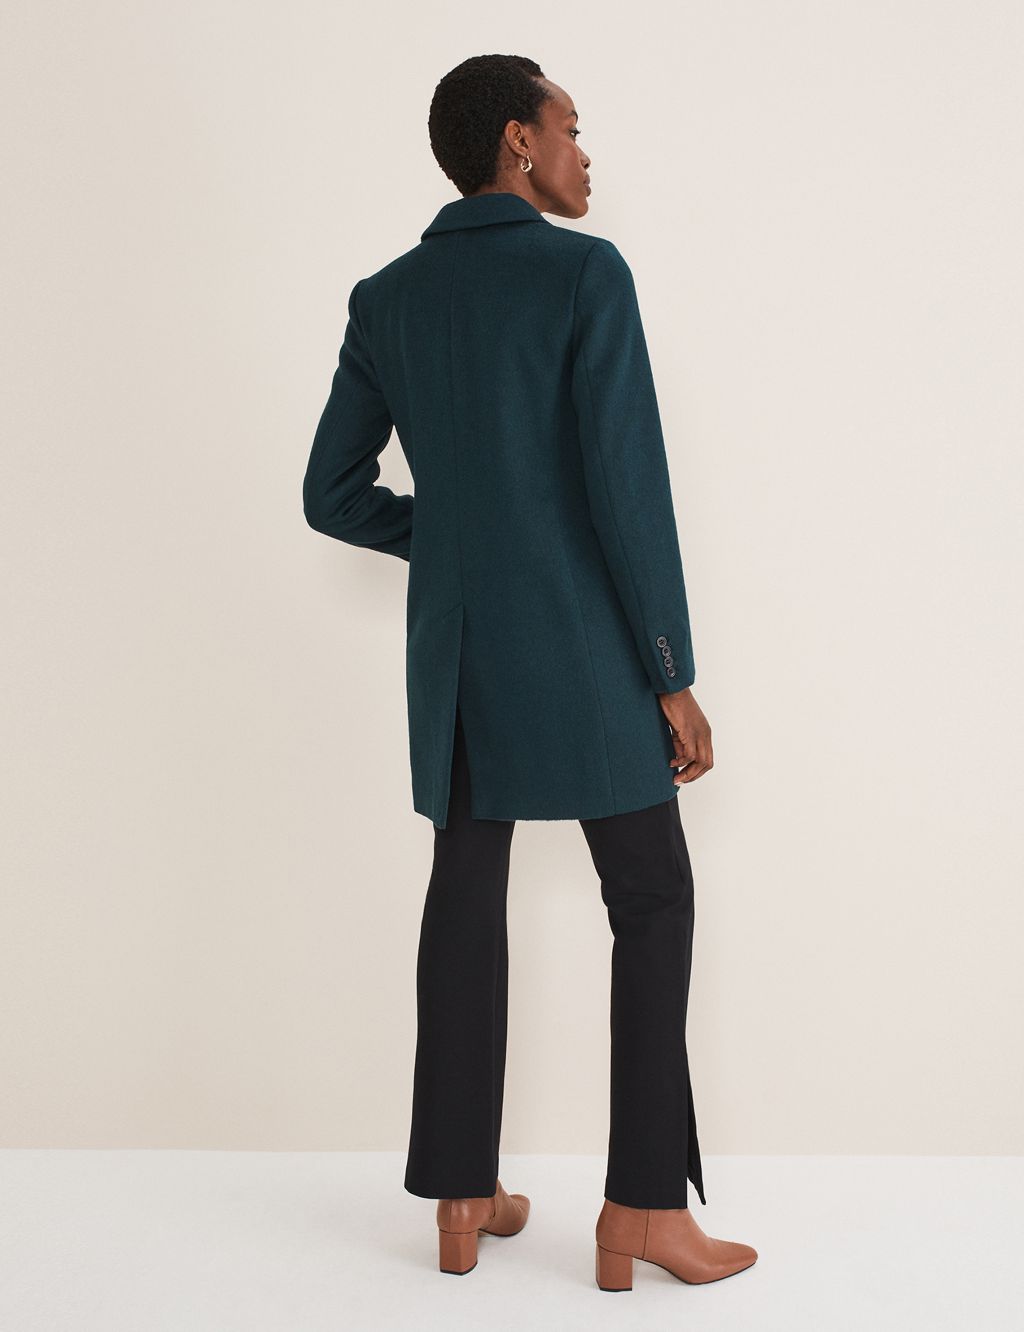 Wool Blend Collared Tailored Coat image 3